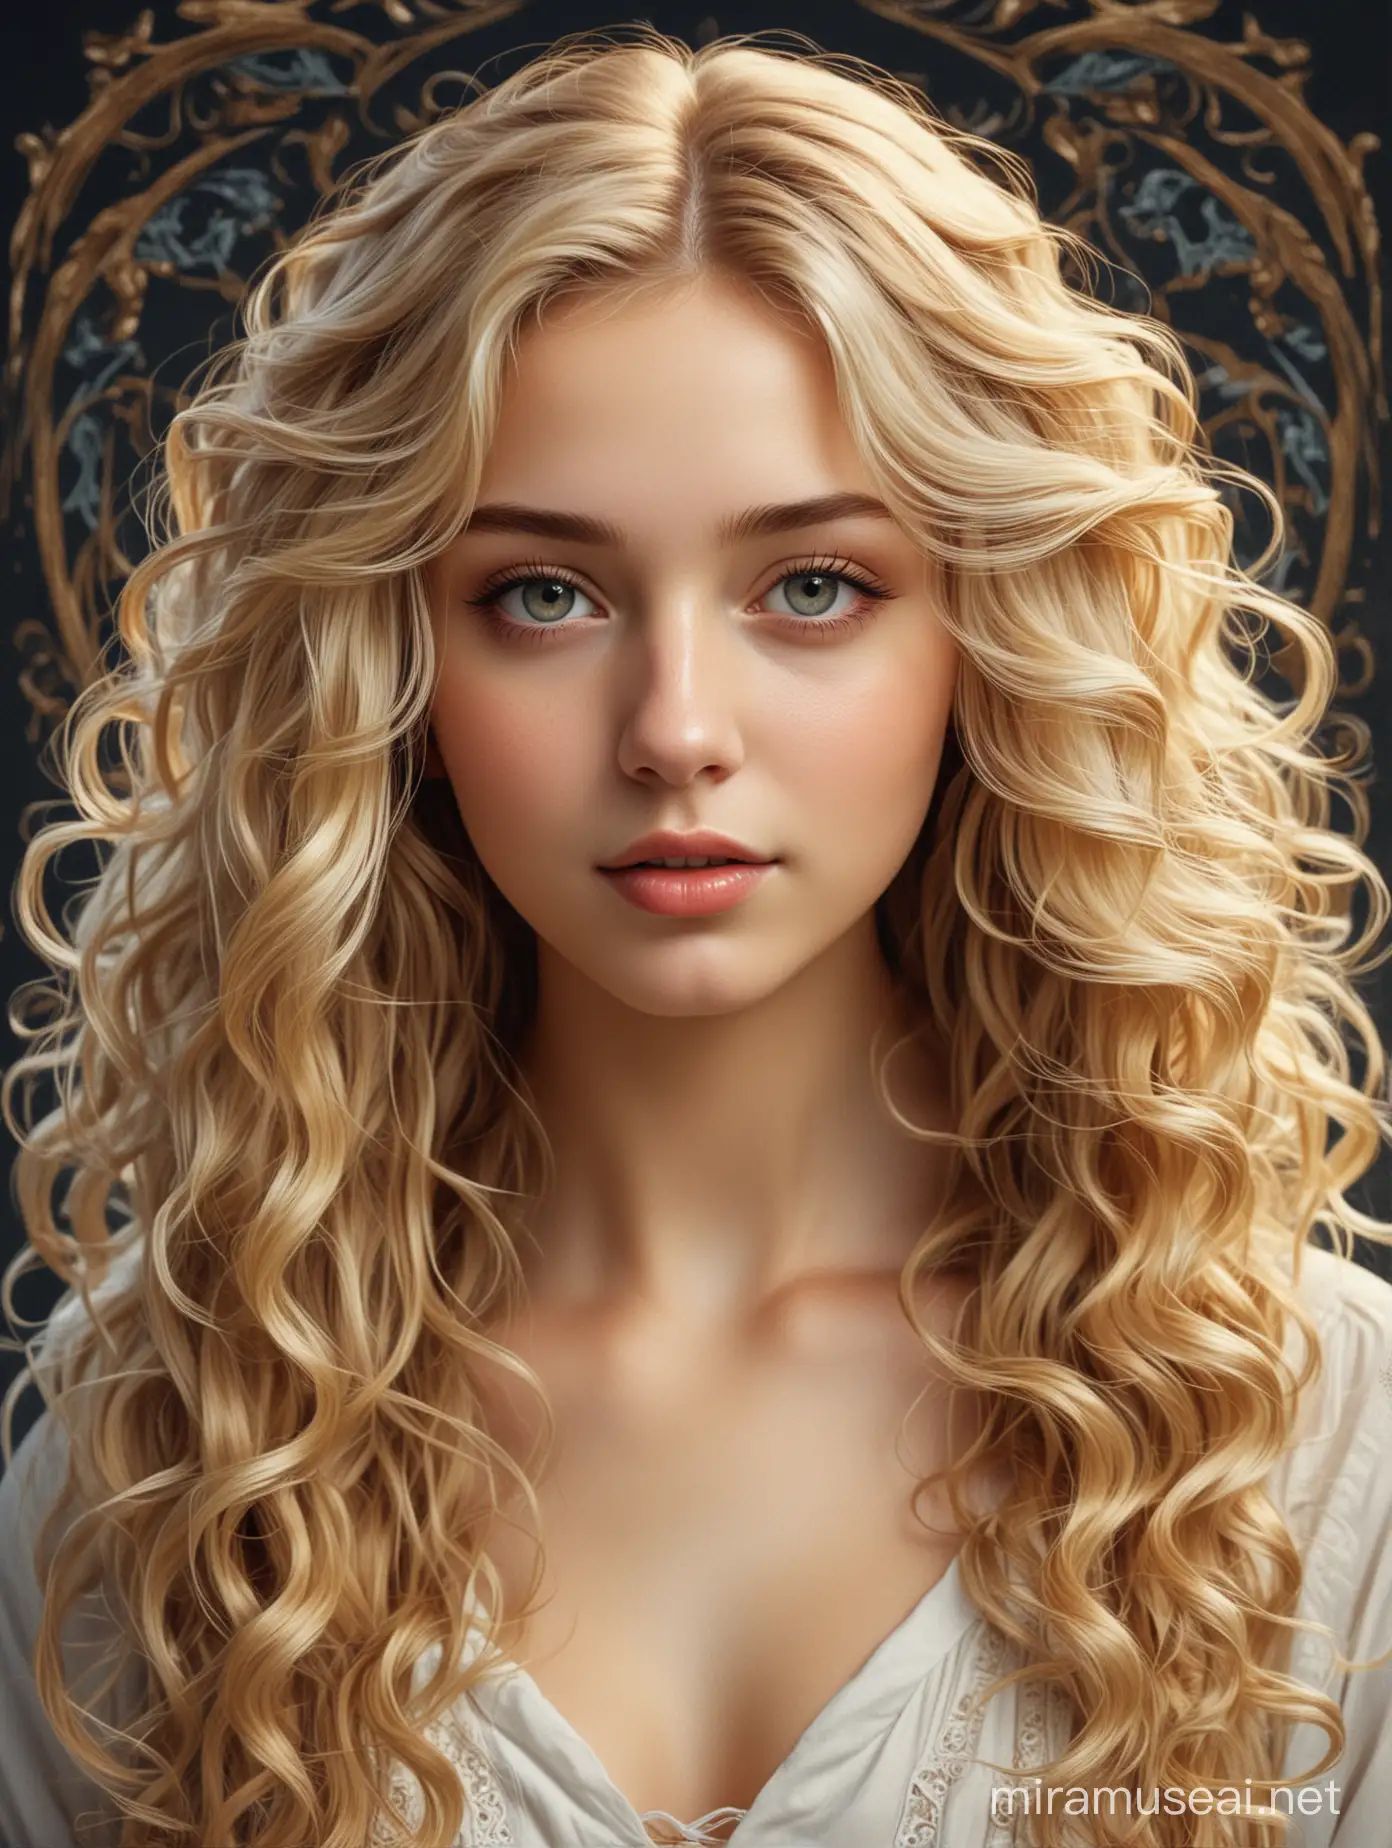 Portrait of Beautiful Blonde Girl with Cascading Curls in Art Nouveau Style